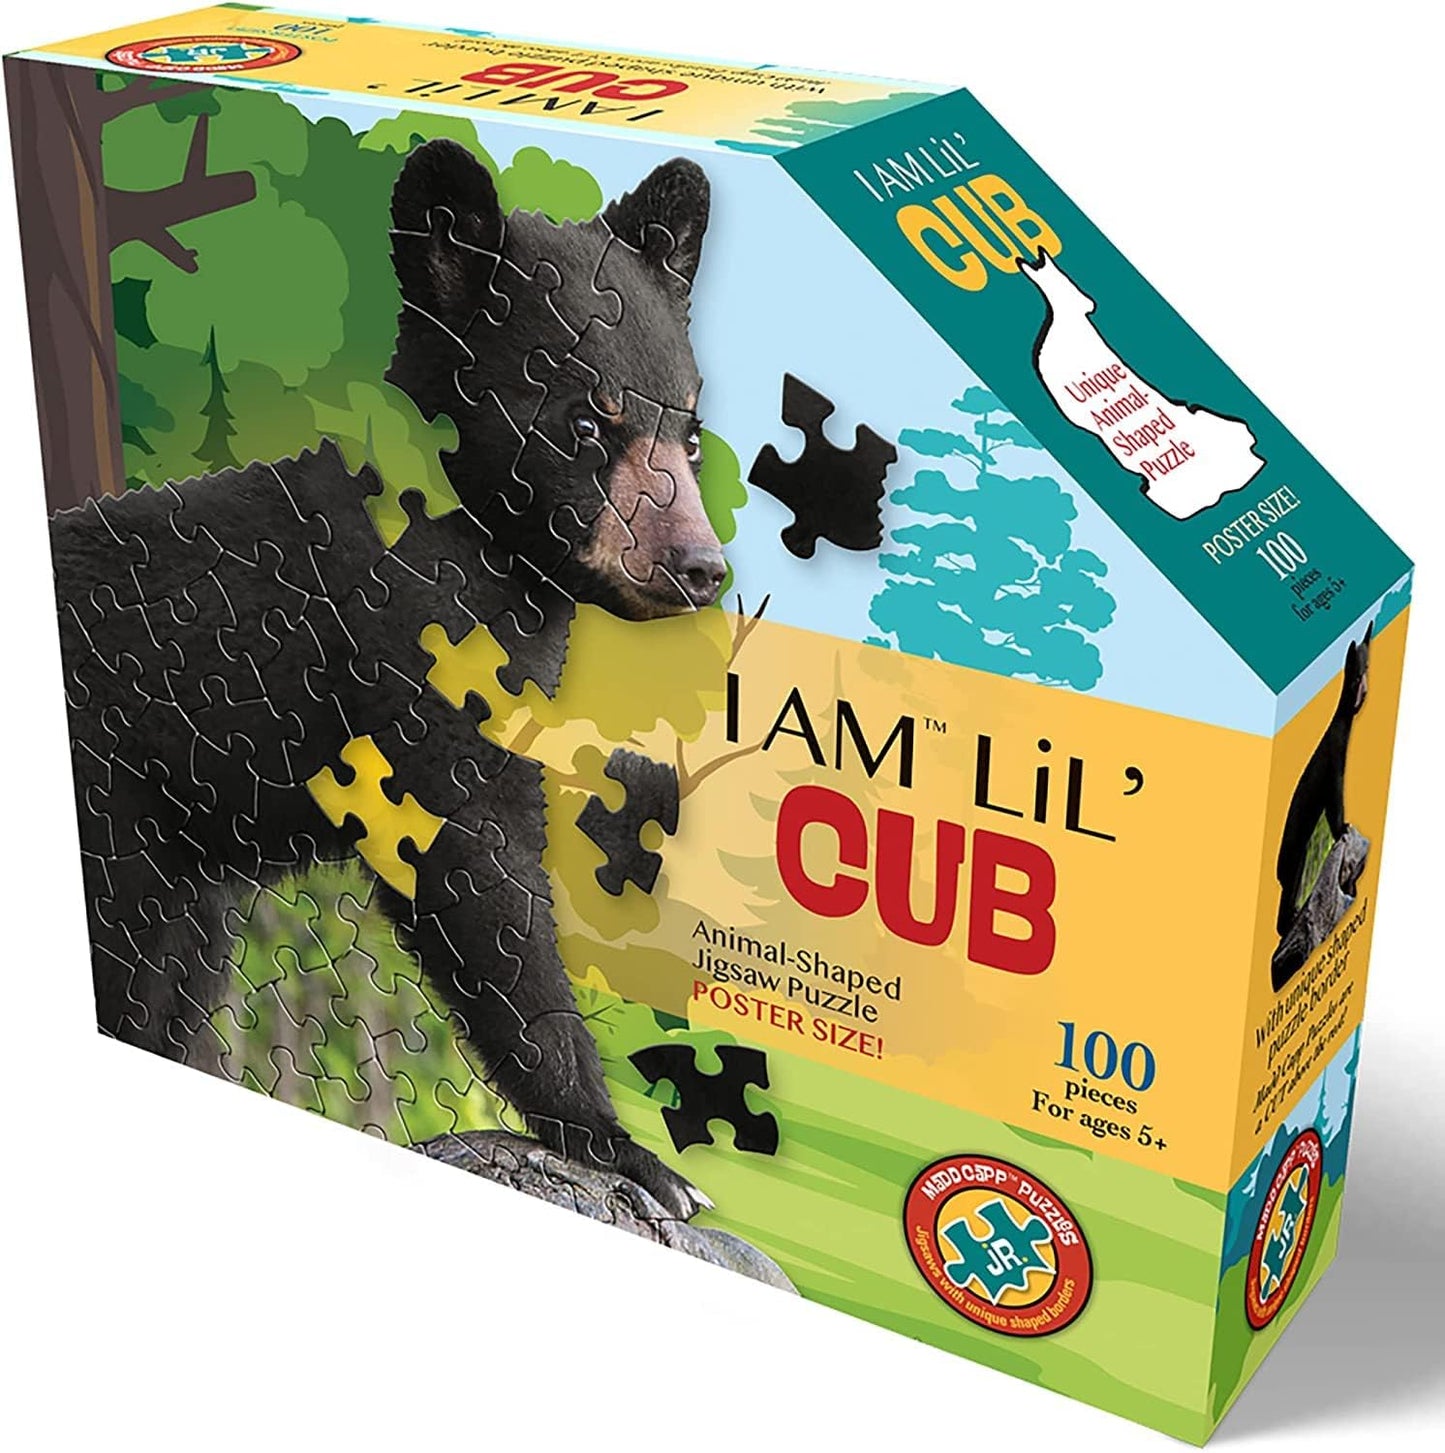 Lil Cub 100 Piece Jigsaw Puzzle for Ages 10 and up - Unique Animal-Shaped Border, Poster Size, Challenging Random Cut, Five-Sided Box Fits on Bookshelf, Includes Educational Fun Facts